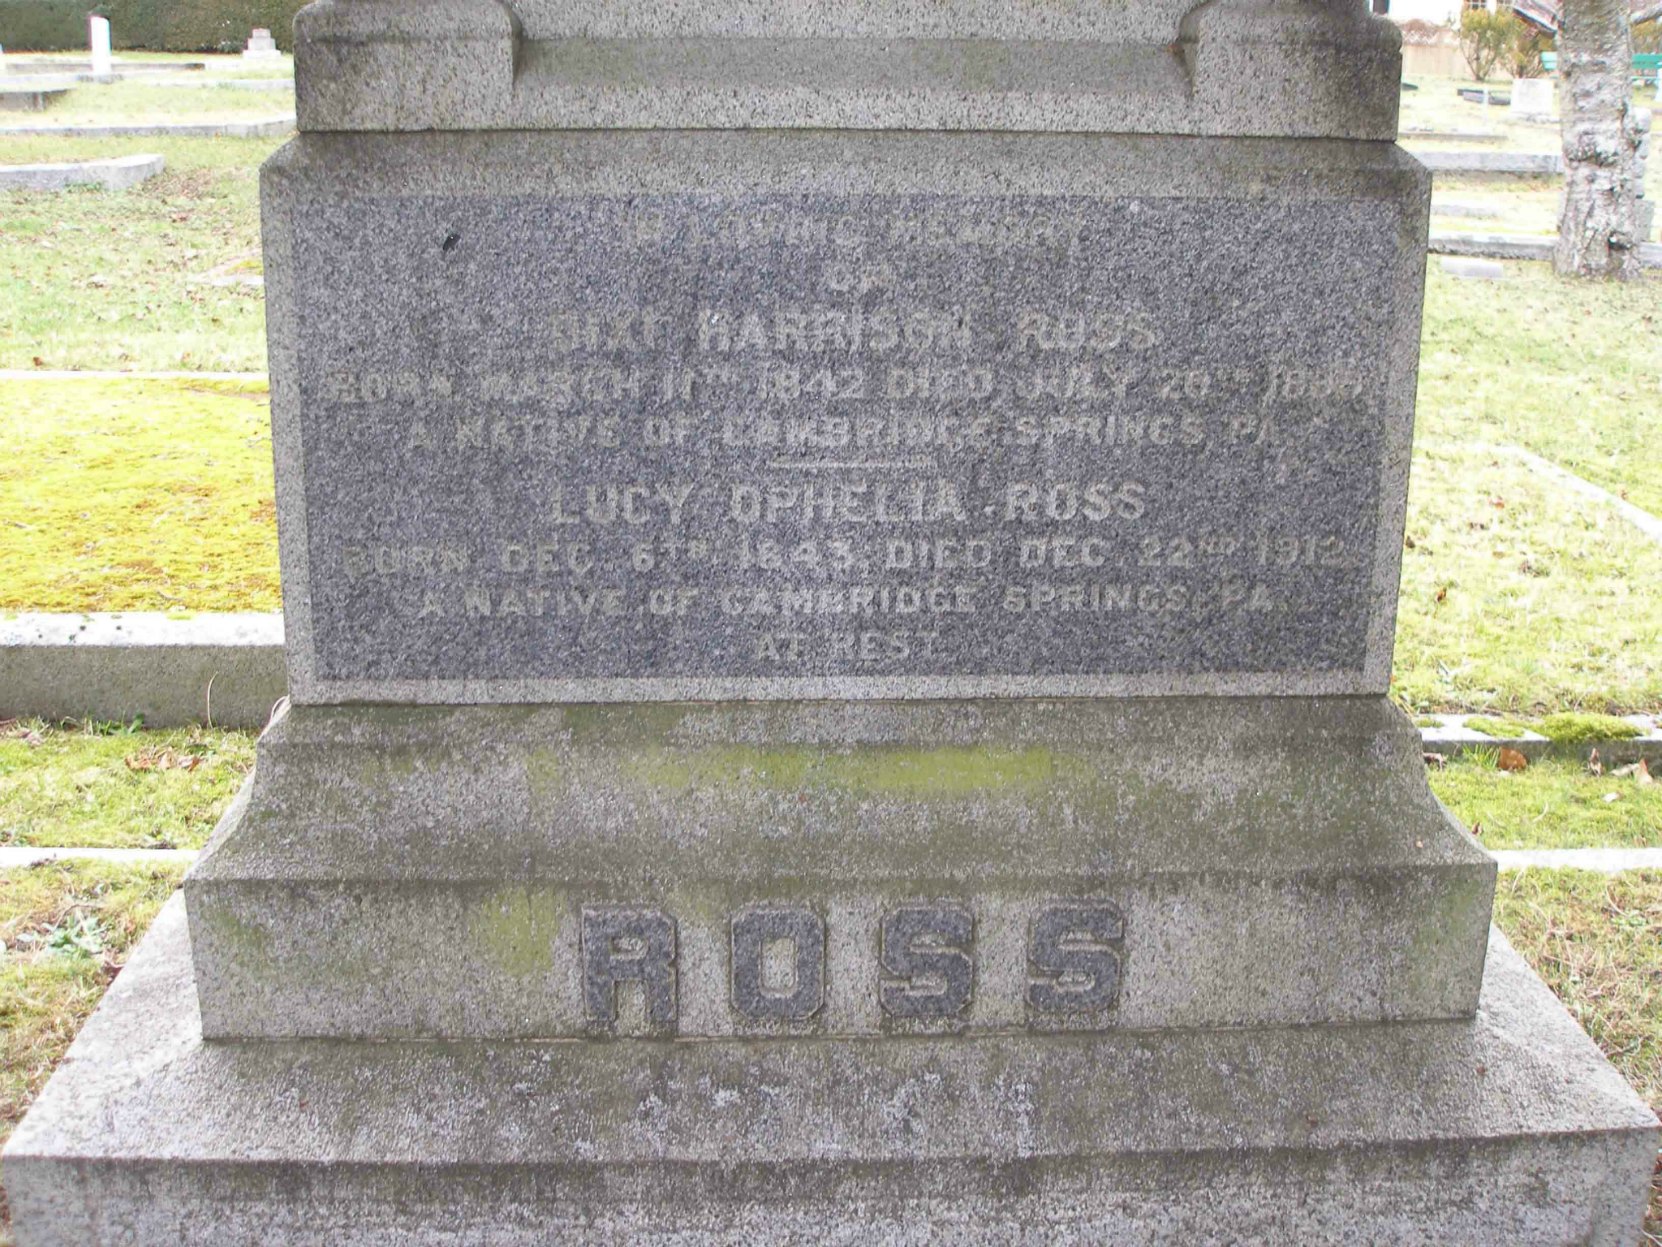 Inscription on the grave of Dixi Harrison Ross, Ross Bay Cemetery, Victoria, B.C.